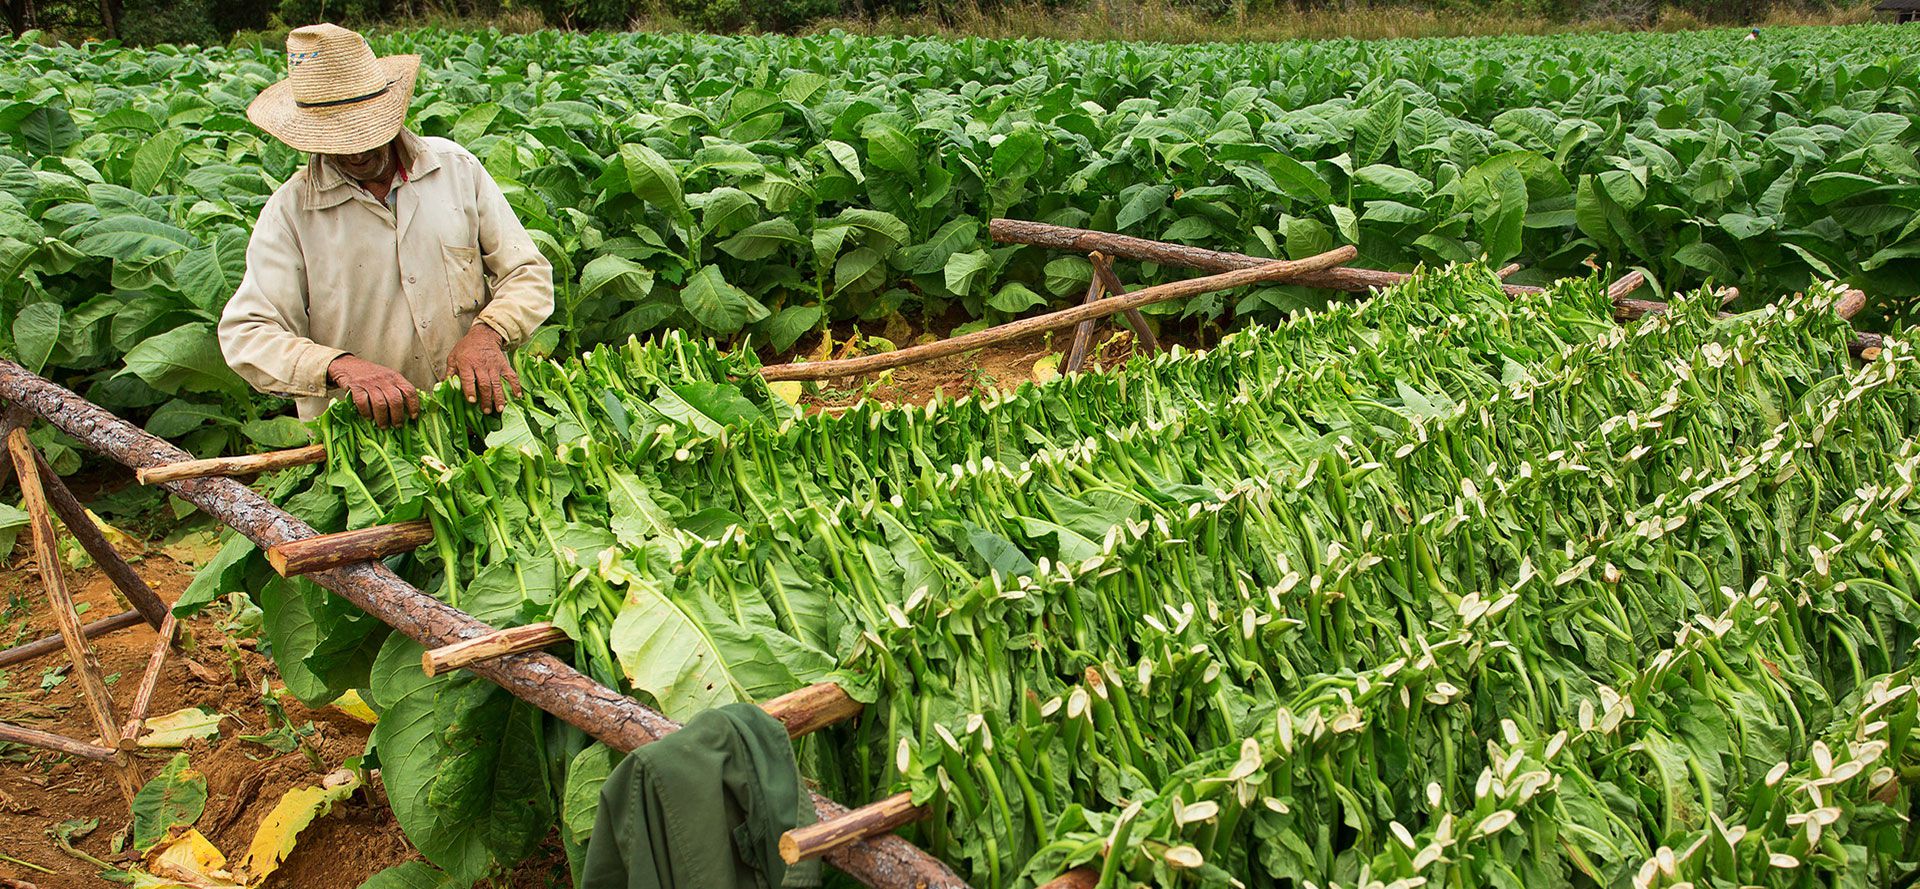 How Tobacco Is Cultivated In Cuba.